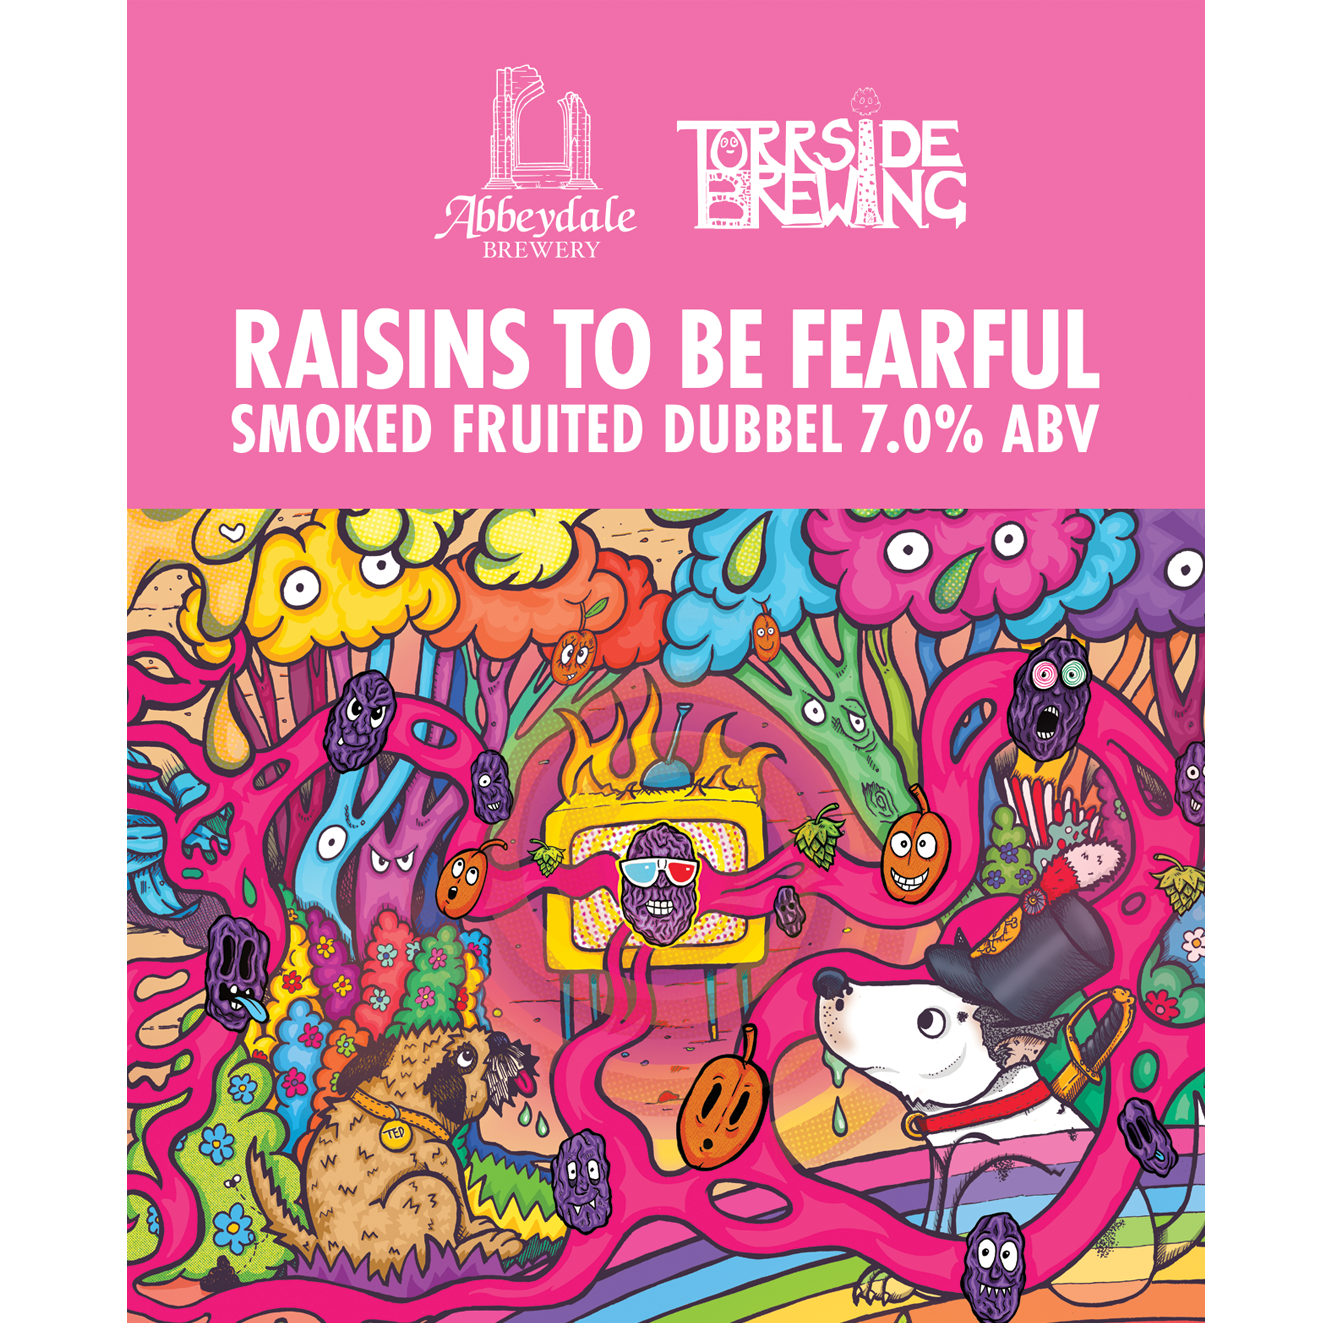 Craft Beer Label Illustration - Abbeydale Brewery x Torrside Brewery - Raisins to be Fearful - Fruited Dubbel Cask Artwork